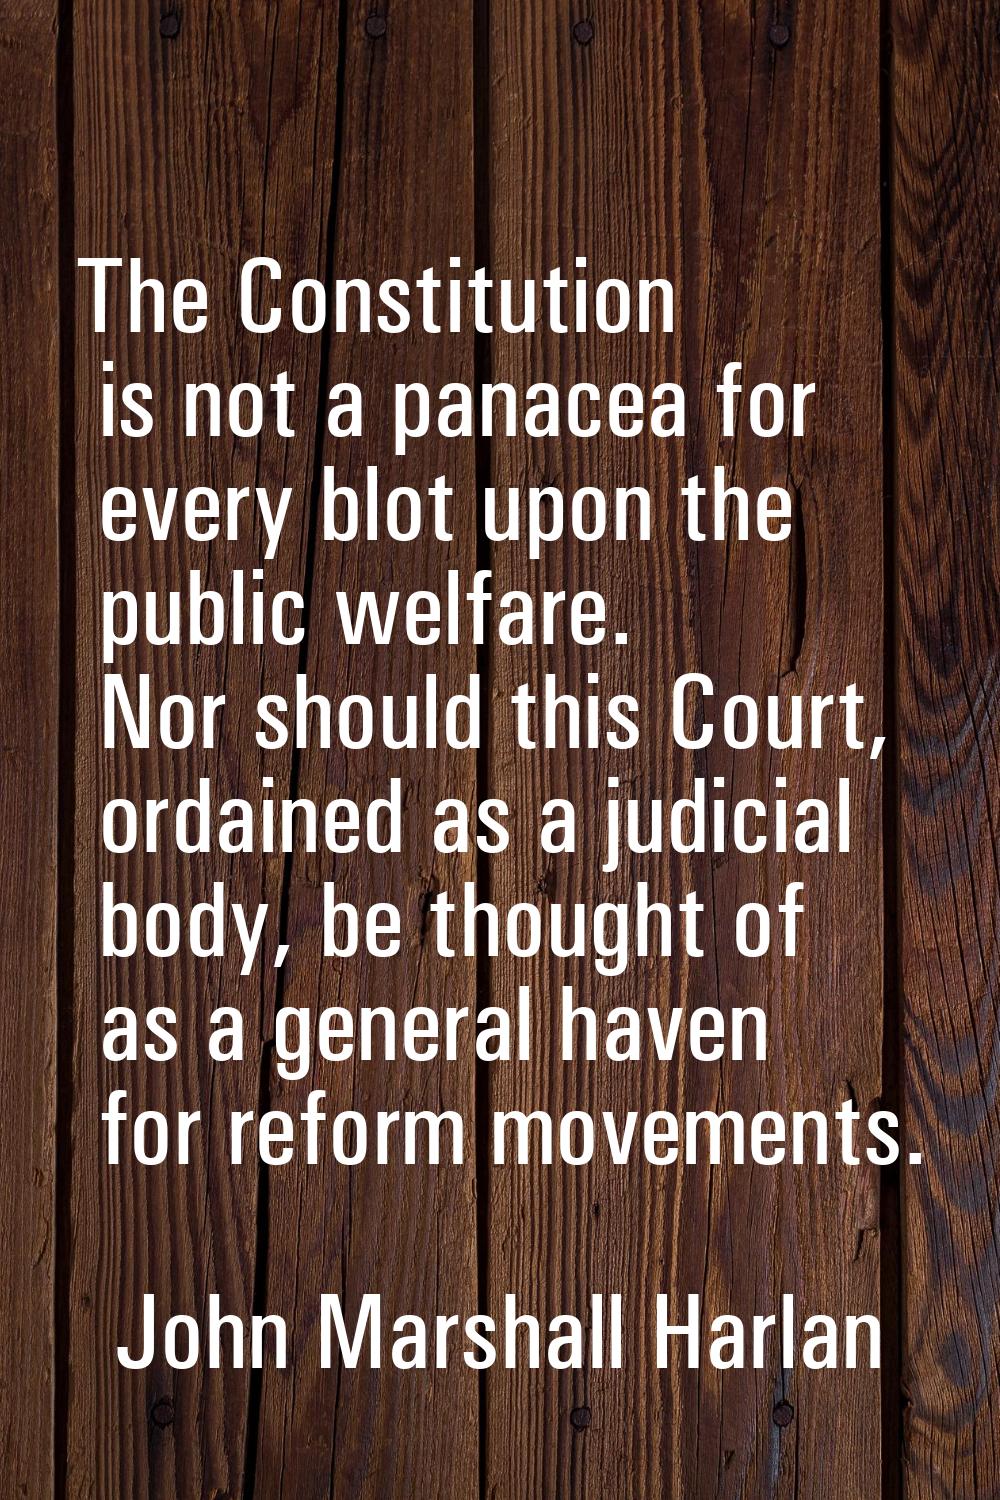 The Constitution is not a panacea for every blot upon the public welfare. Nor should this Court, or